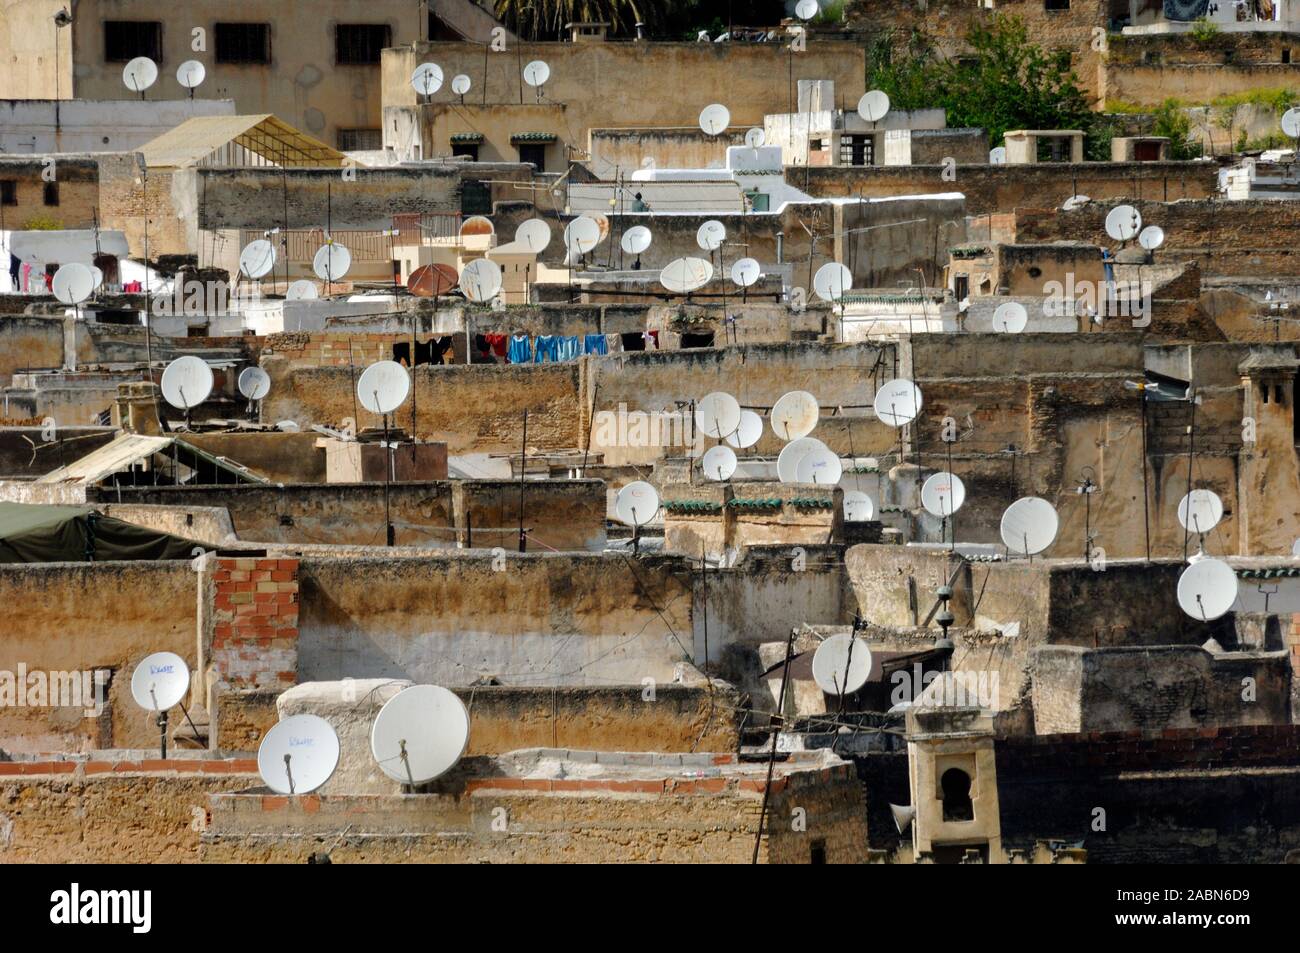 Townscape or View over Rooftops of Fez with Satellite Dishes in the Old Town or Historic District Fes or Fez Morocco Stock Photo